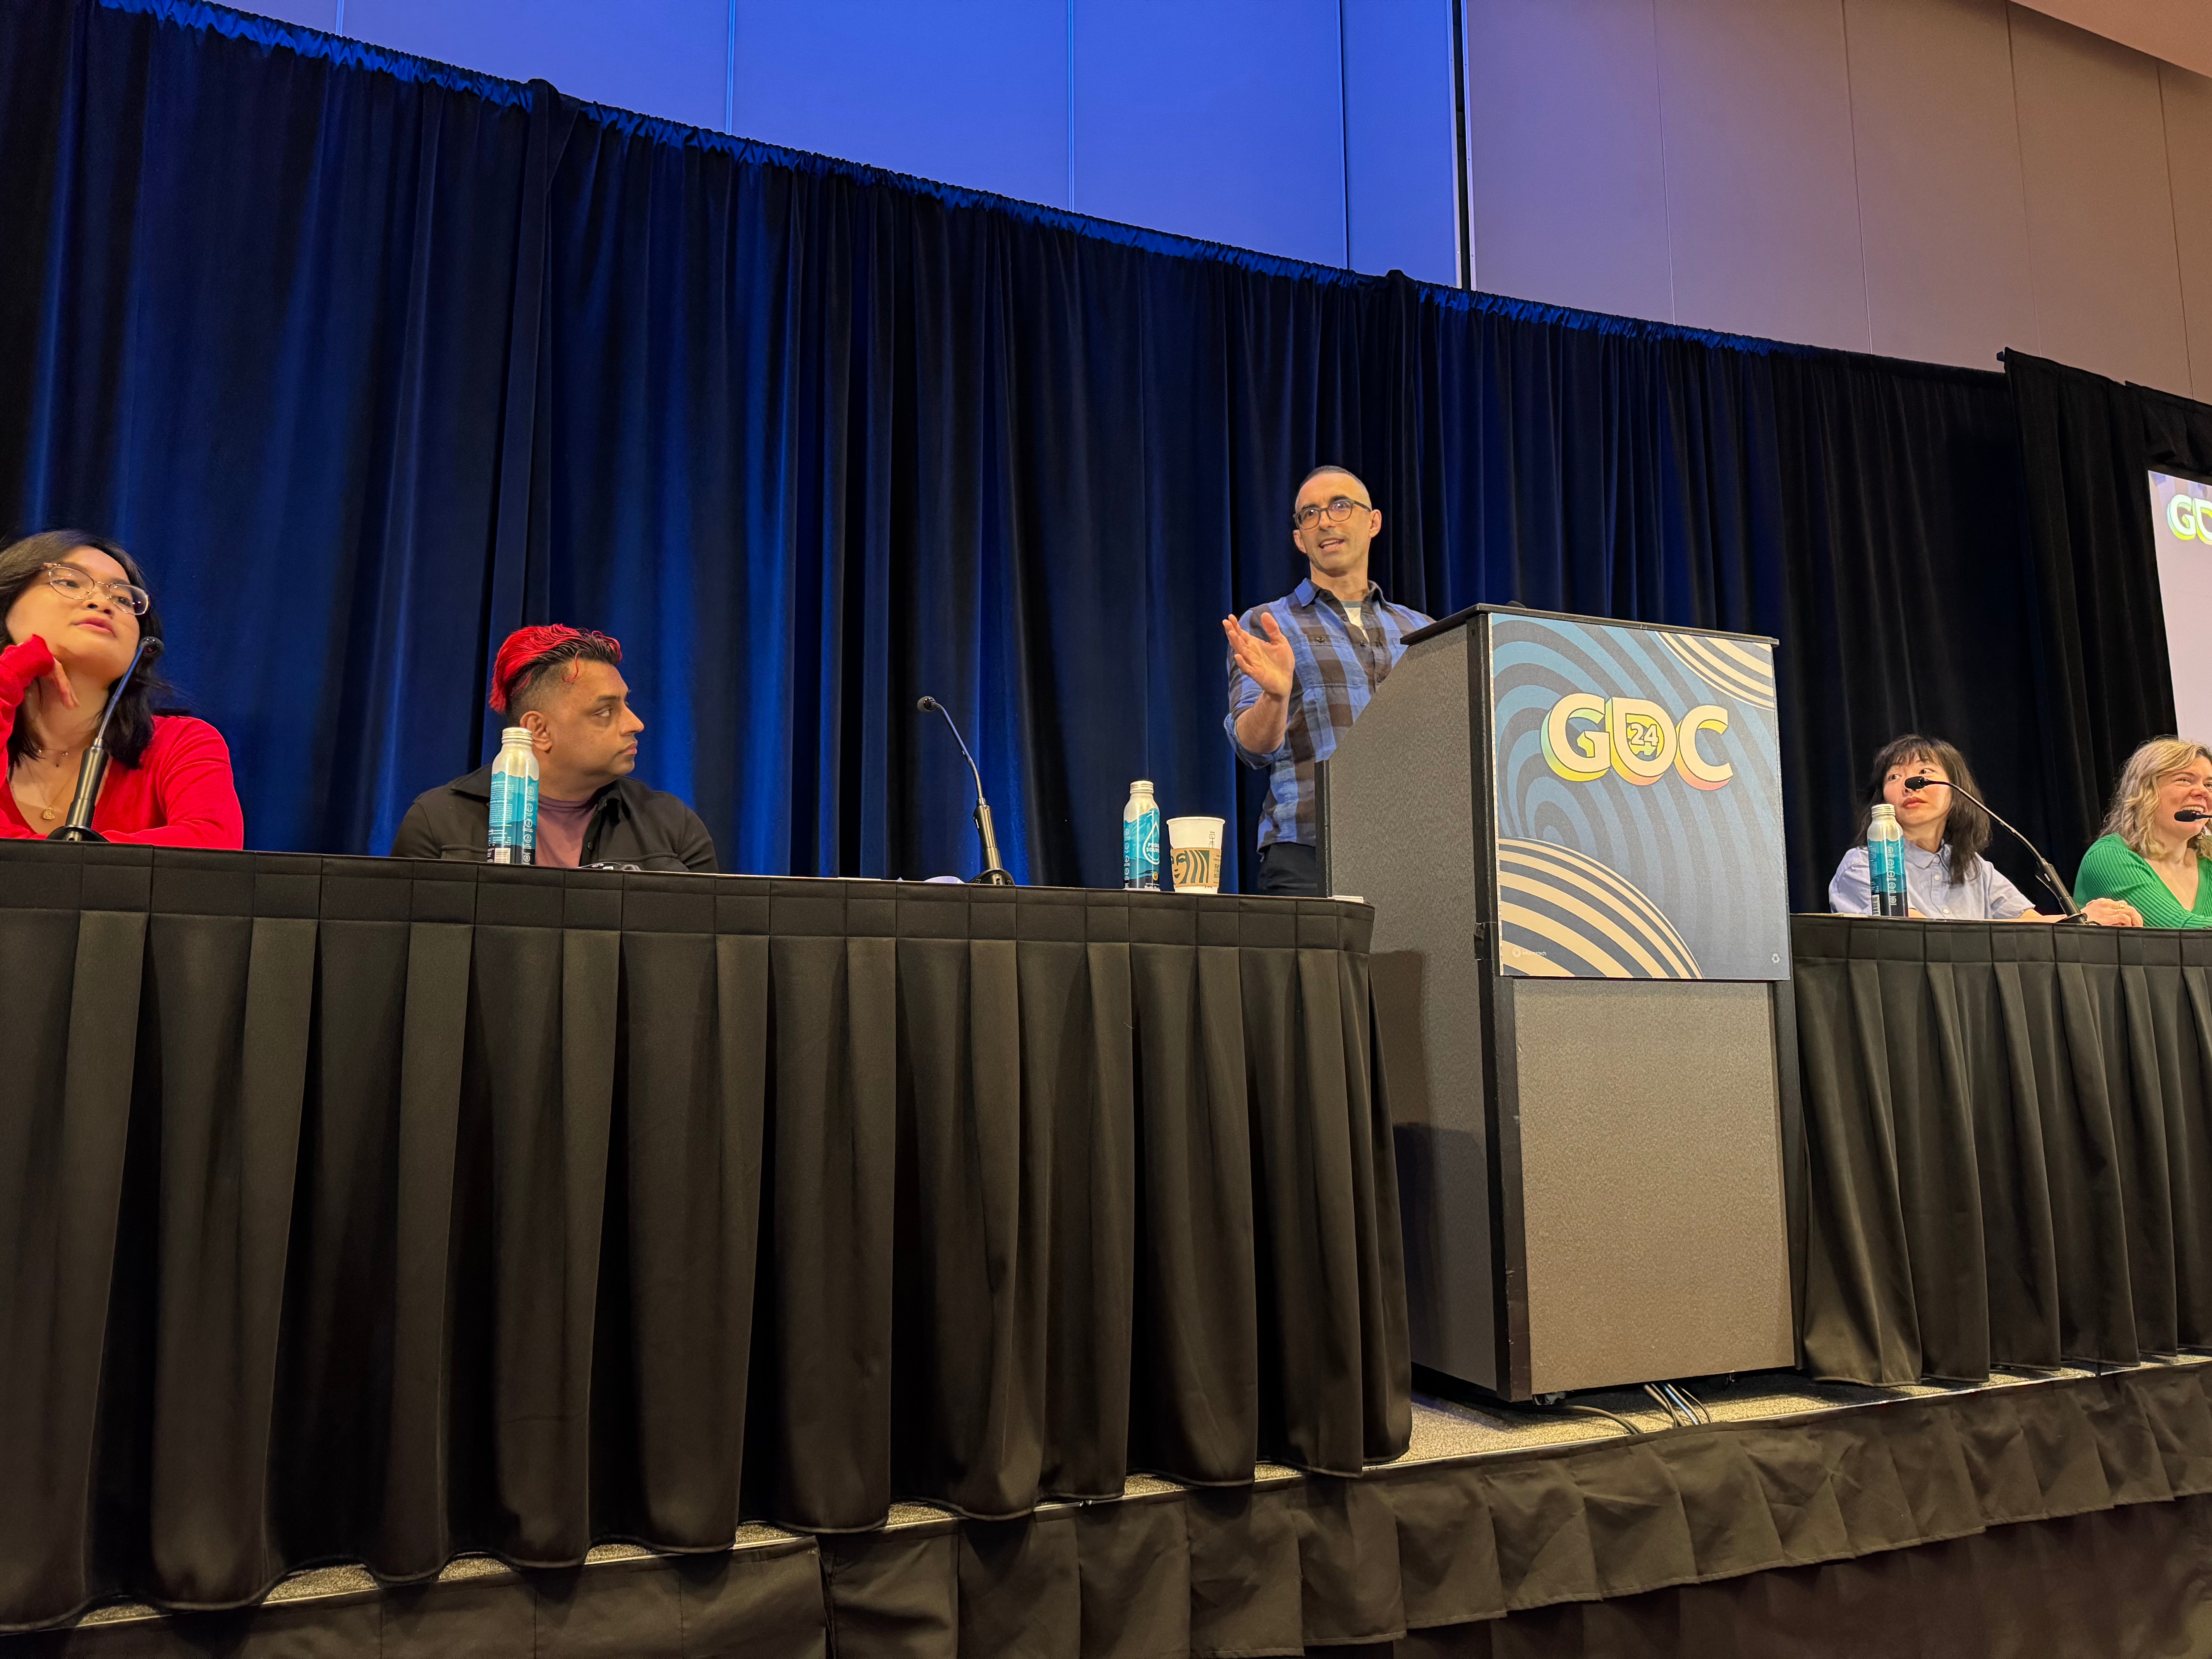 Advocacy microtalks at GDC directly confront enabling harassment
campaigns